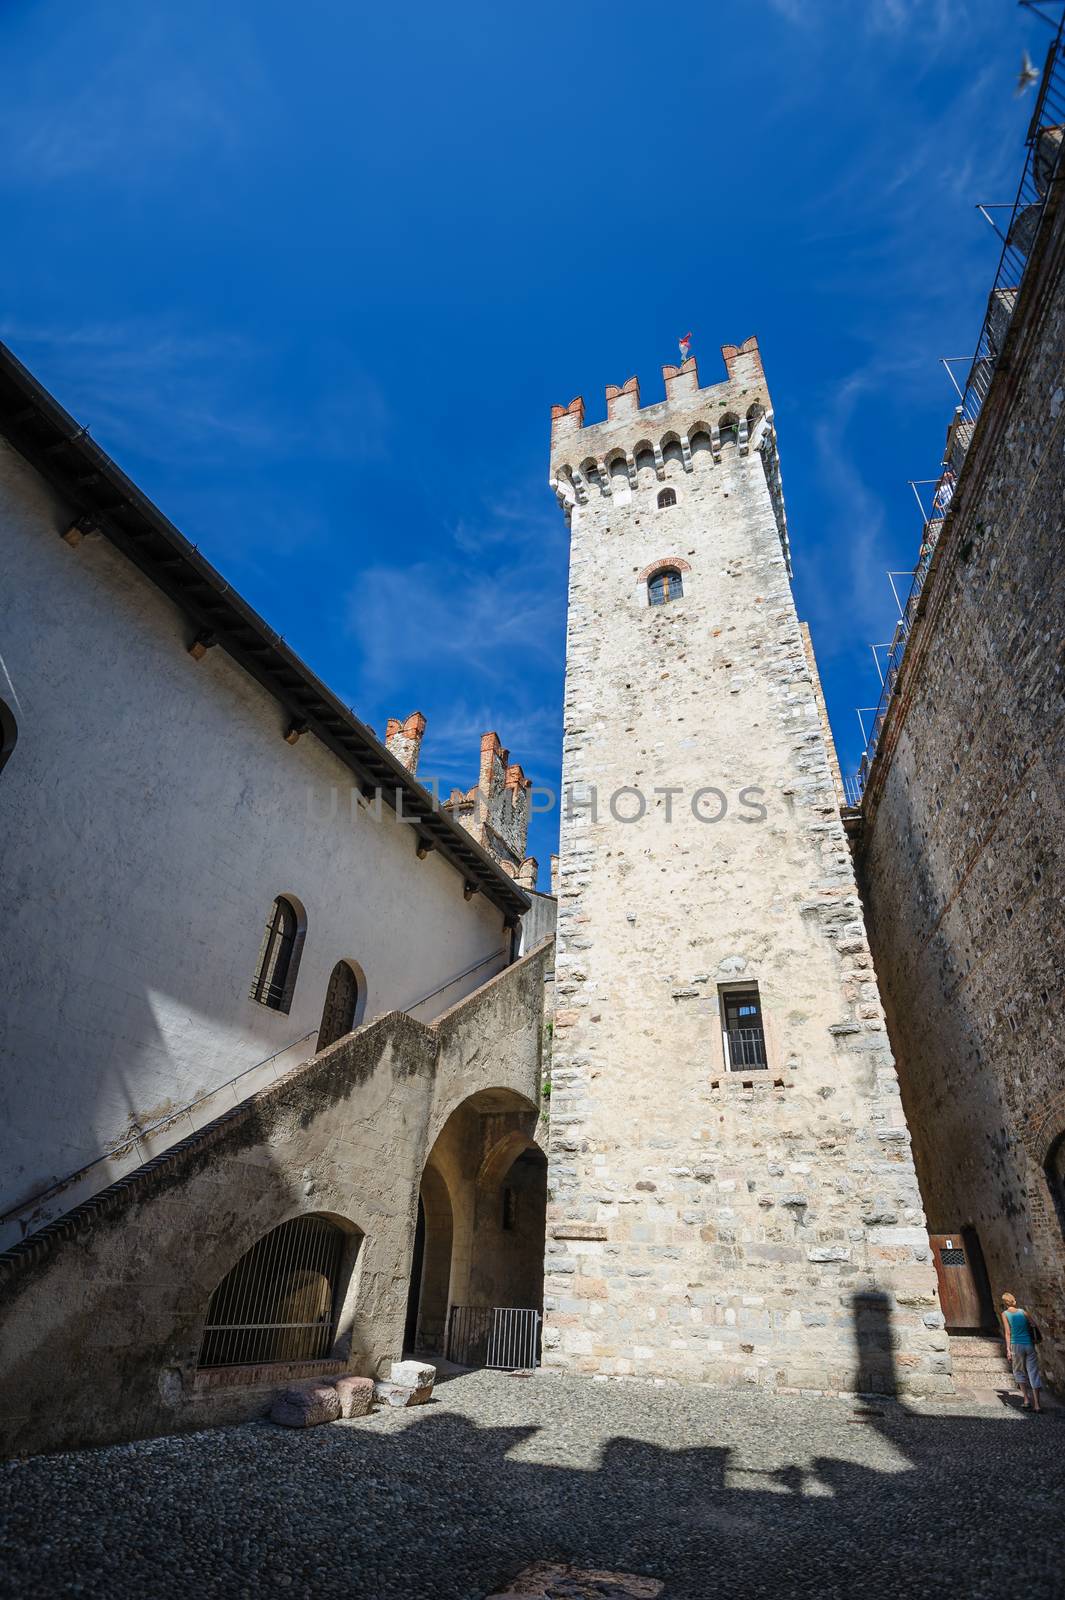 Sirmione, province of Brescia, Lombardy, northern Italy, 15th August 2016: people visiting the interior of medieval castle Scaliger on lake Lago di Garda